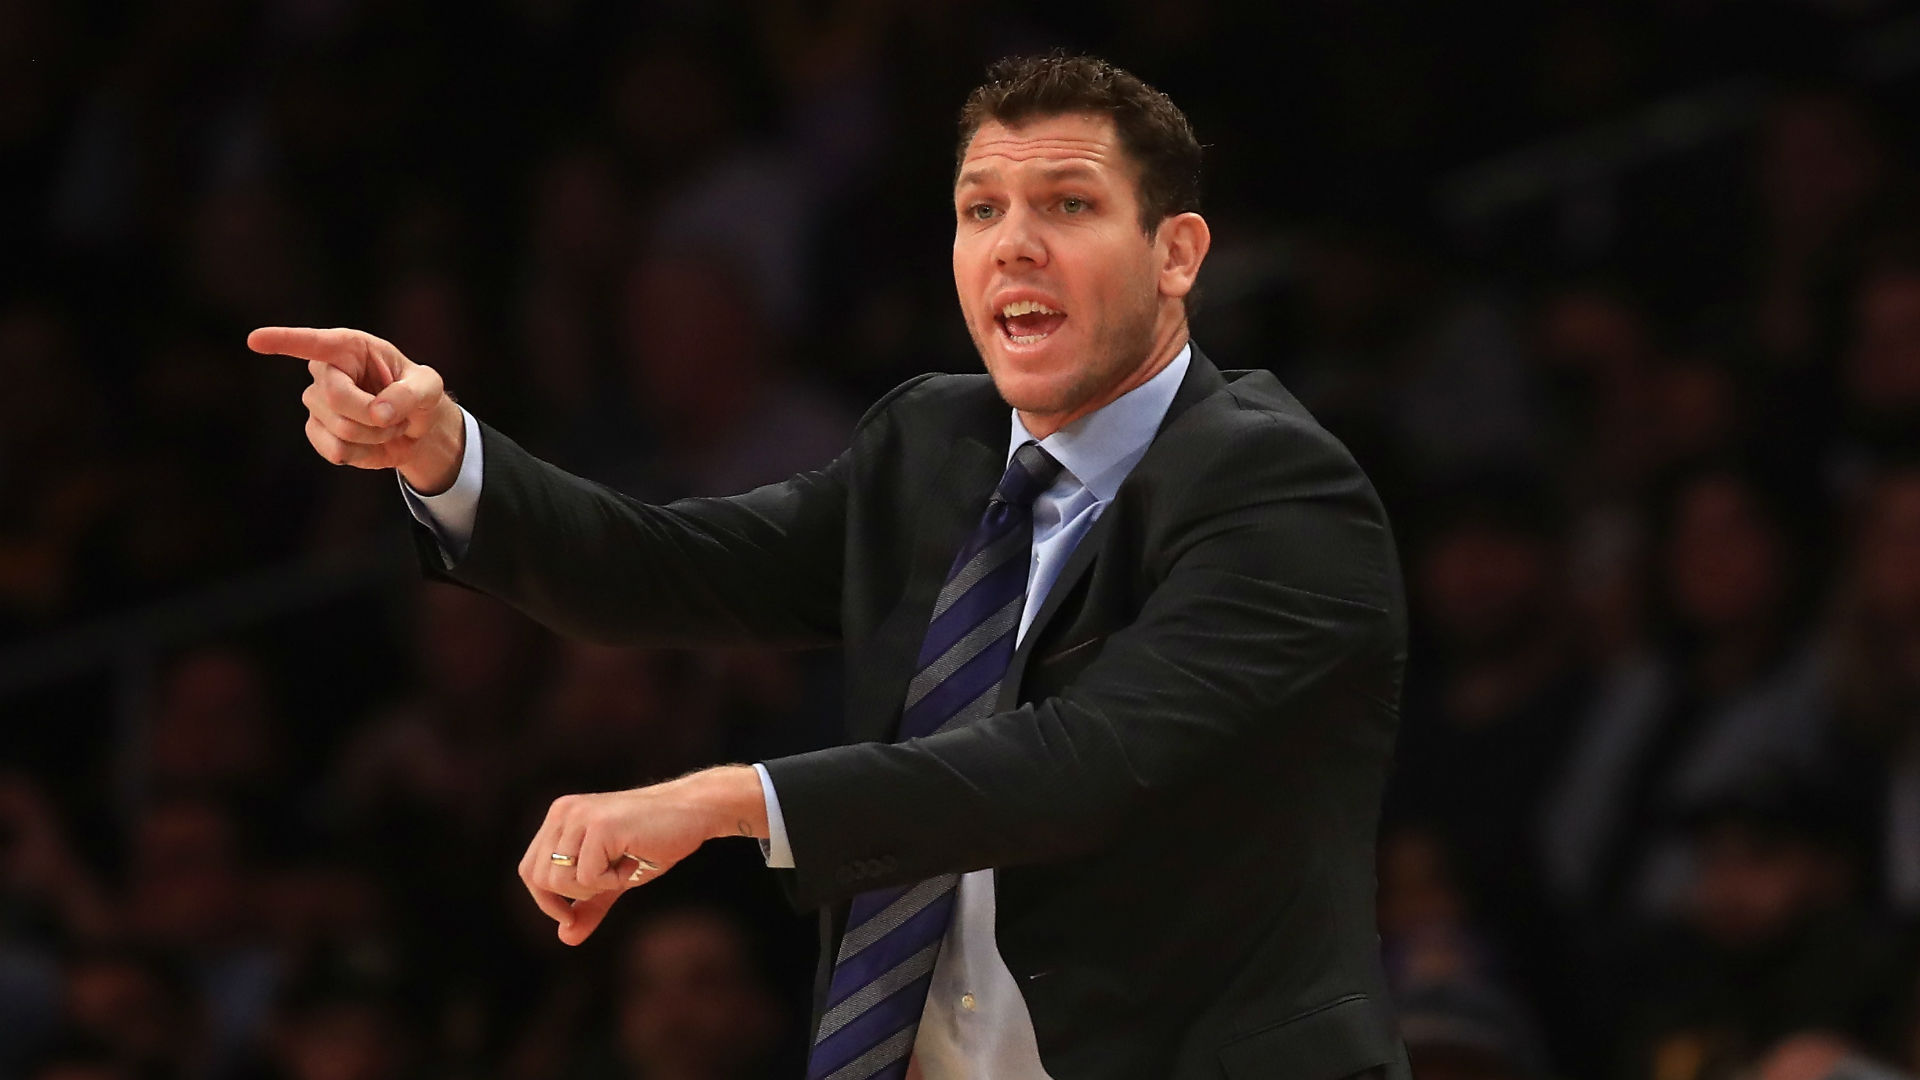 The Los Angeles Lakers must improve their mentality if they are to regularly win tough games on the road, says head coach Luke Walton.